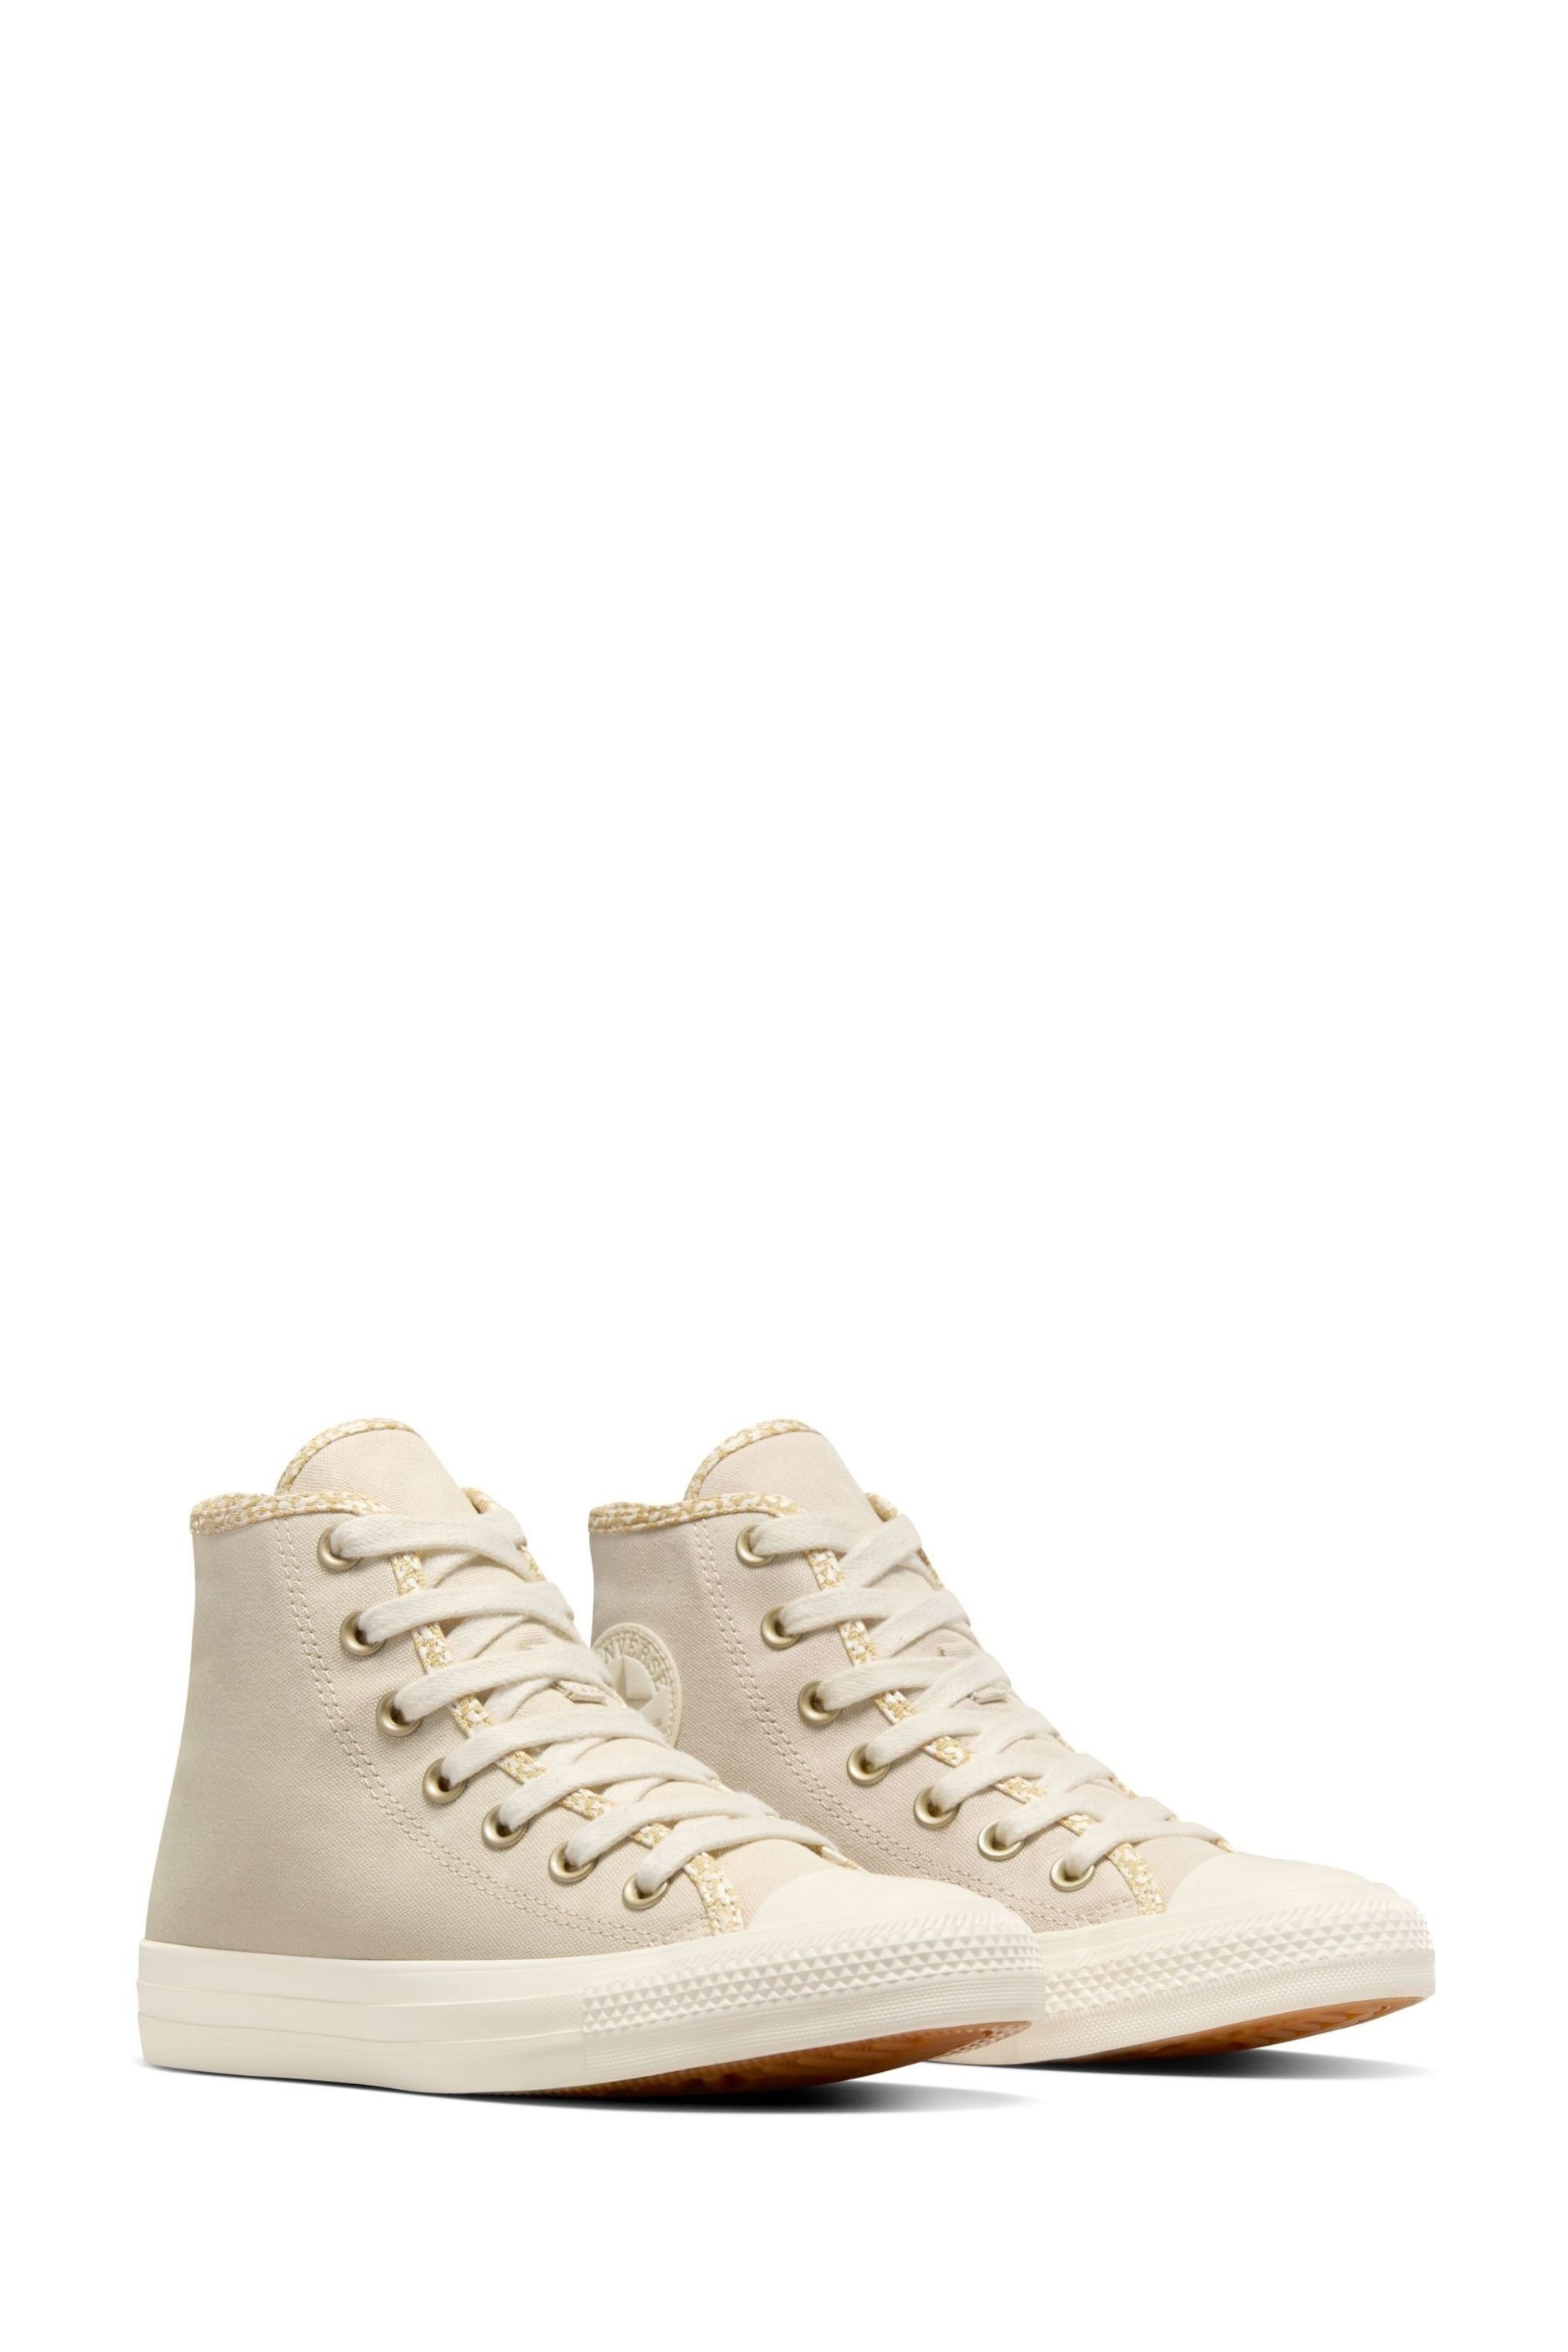 Converse Beige Chuck Taylor All Star High Top Trainers - Image 10 of 12